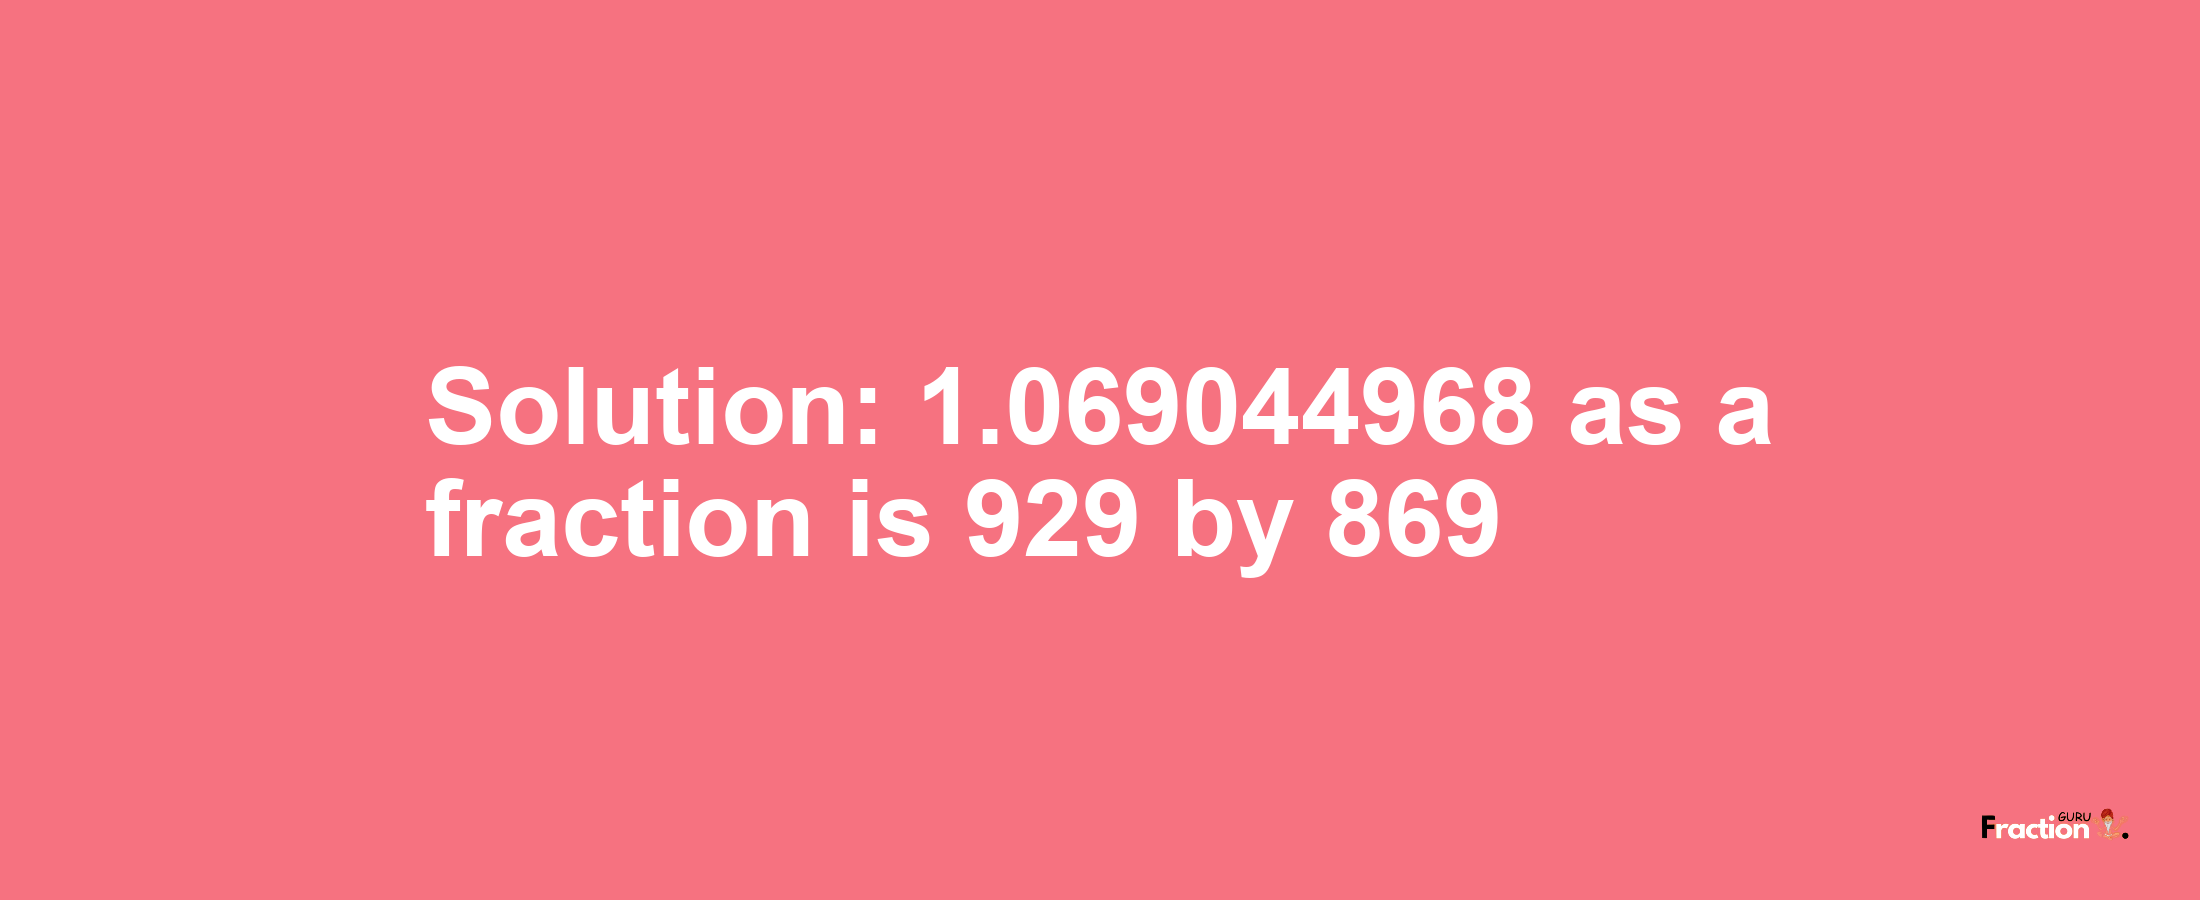 Solution:1.069044968 as a fraction is 929/869